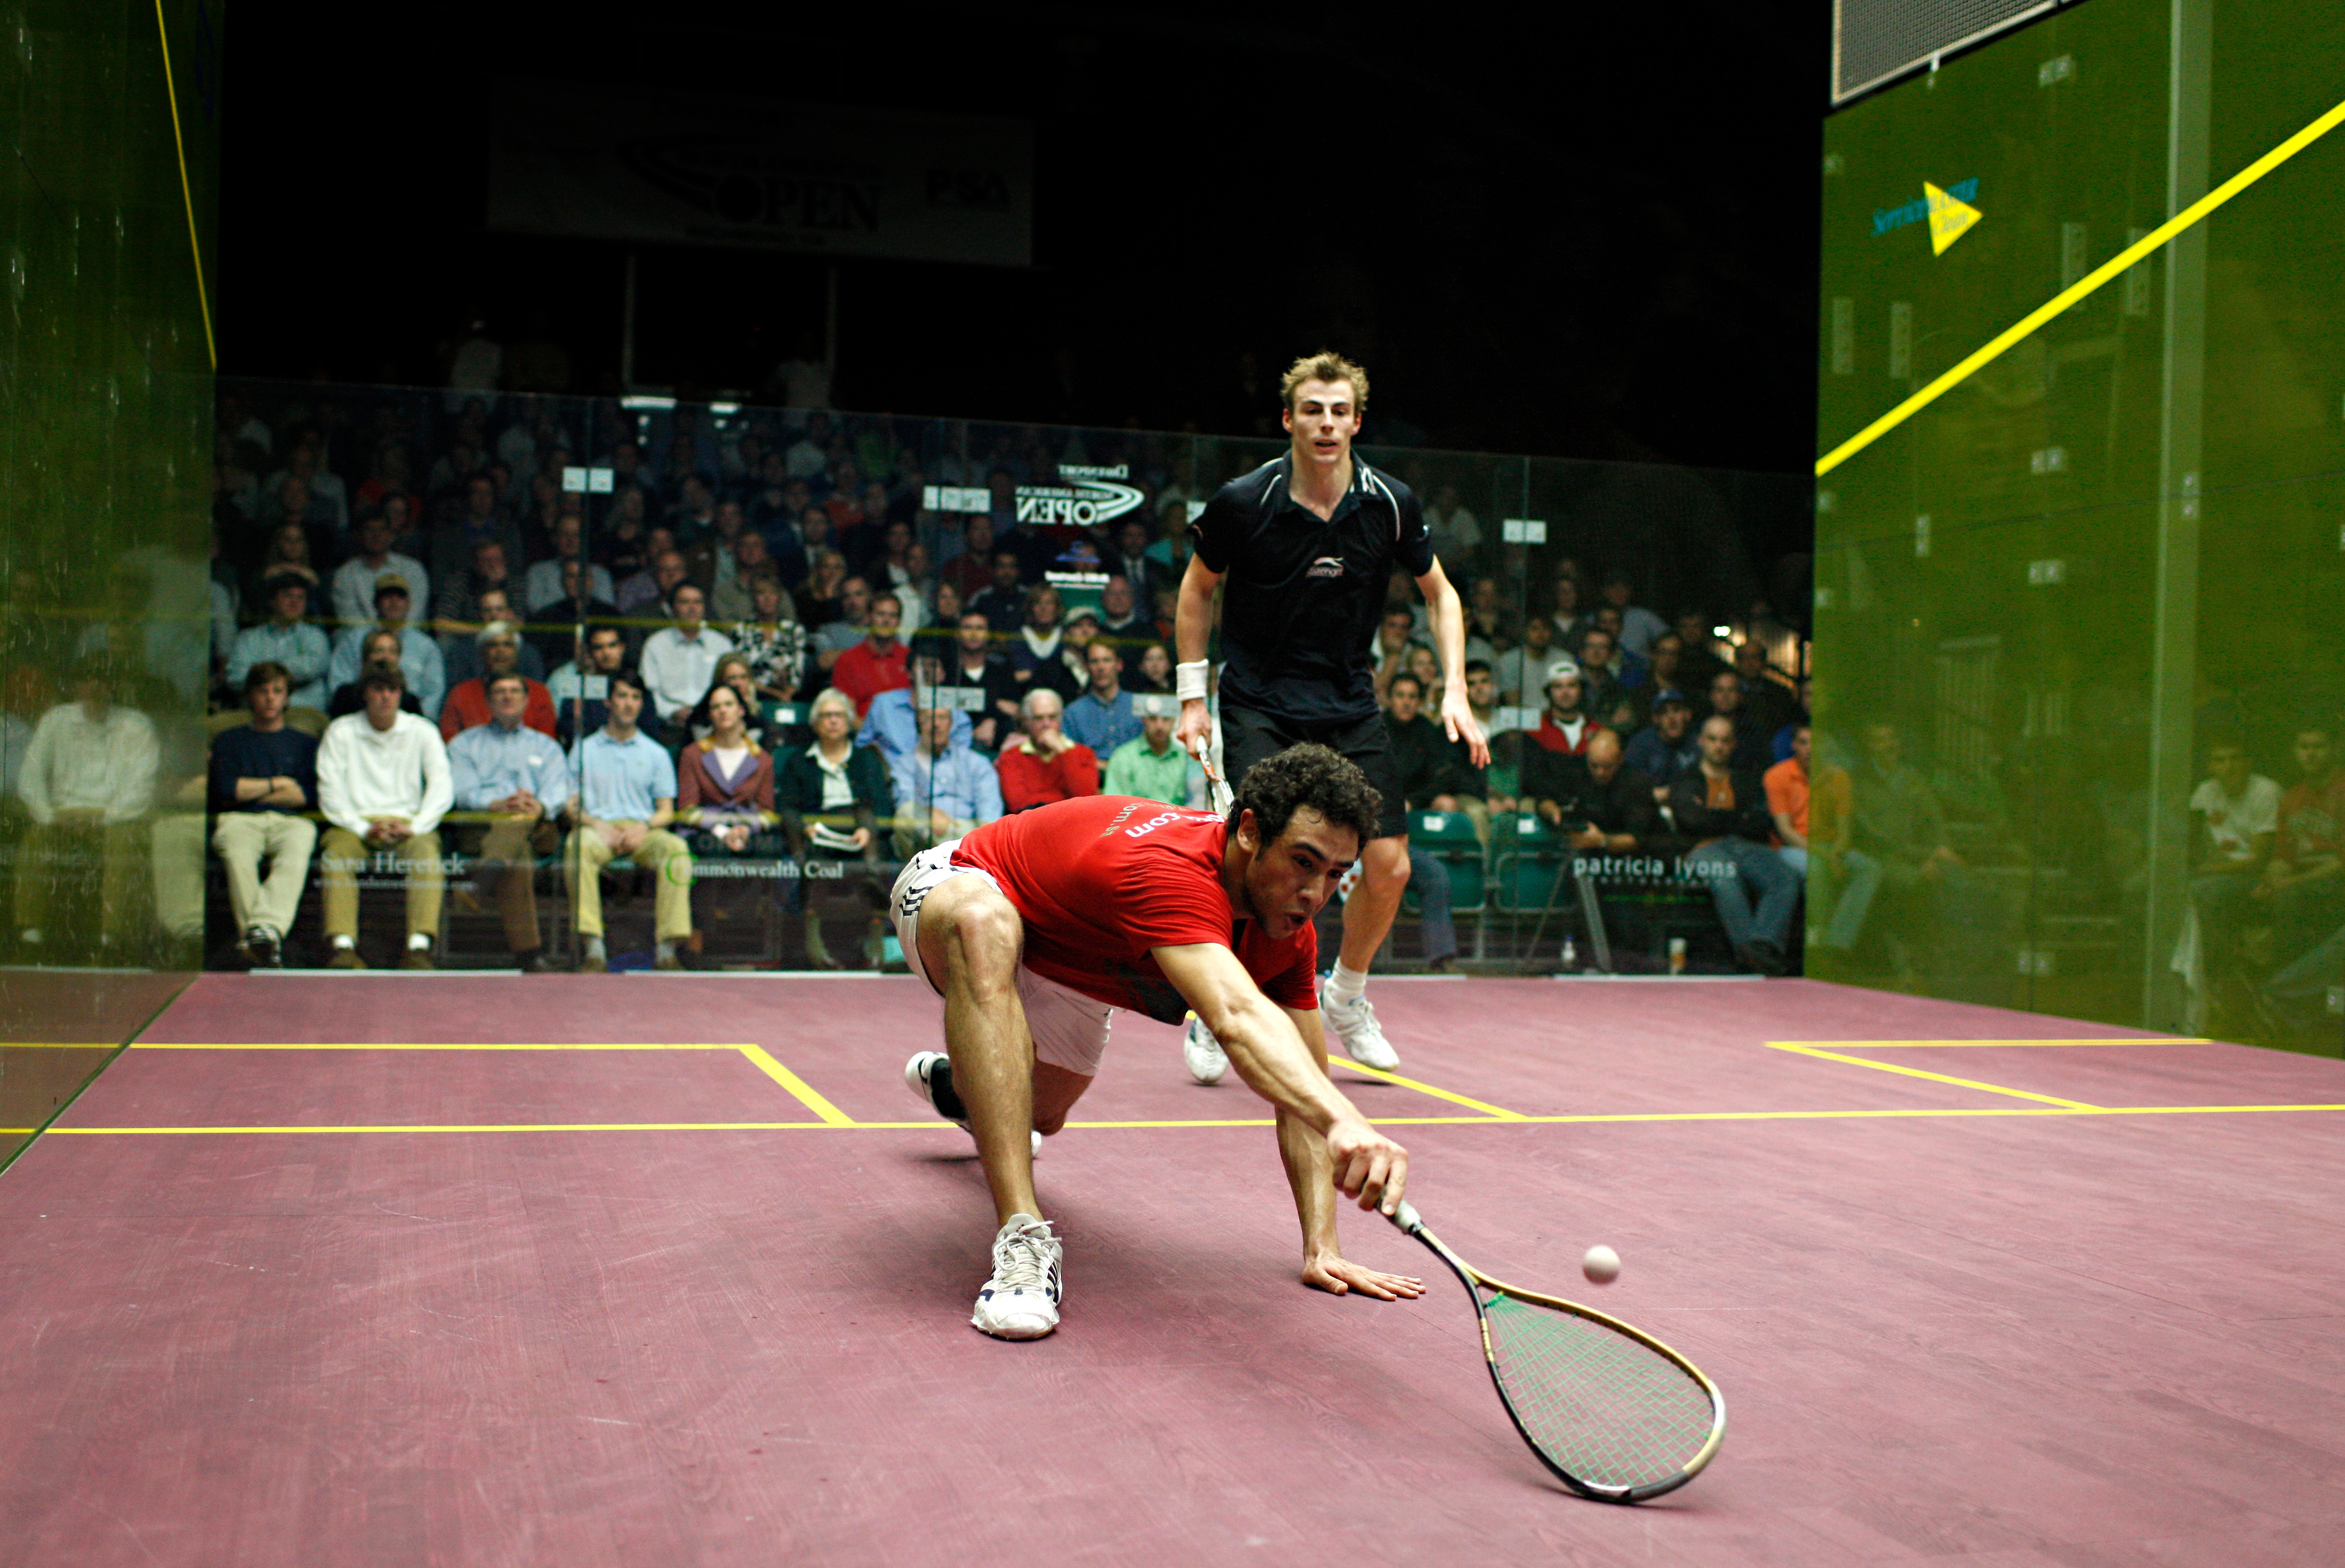 In 2008, Ramy Ashour was burned out after playing a string of tournaments consecutively and Nick Matthew was on the sidelines recovering from shoulder surgery. With both players hungry in 2009, Ashour and Matthew battled to the end before Ashour captured the title.